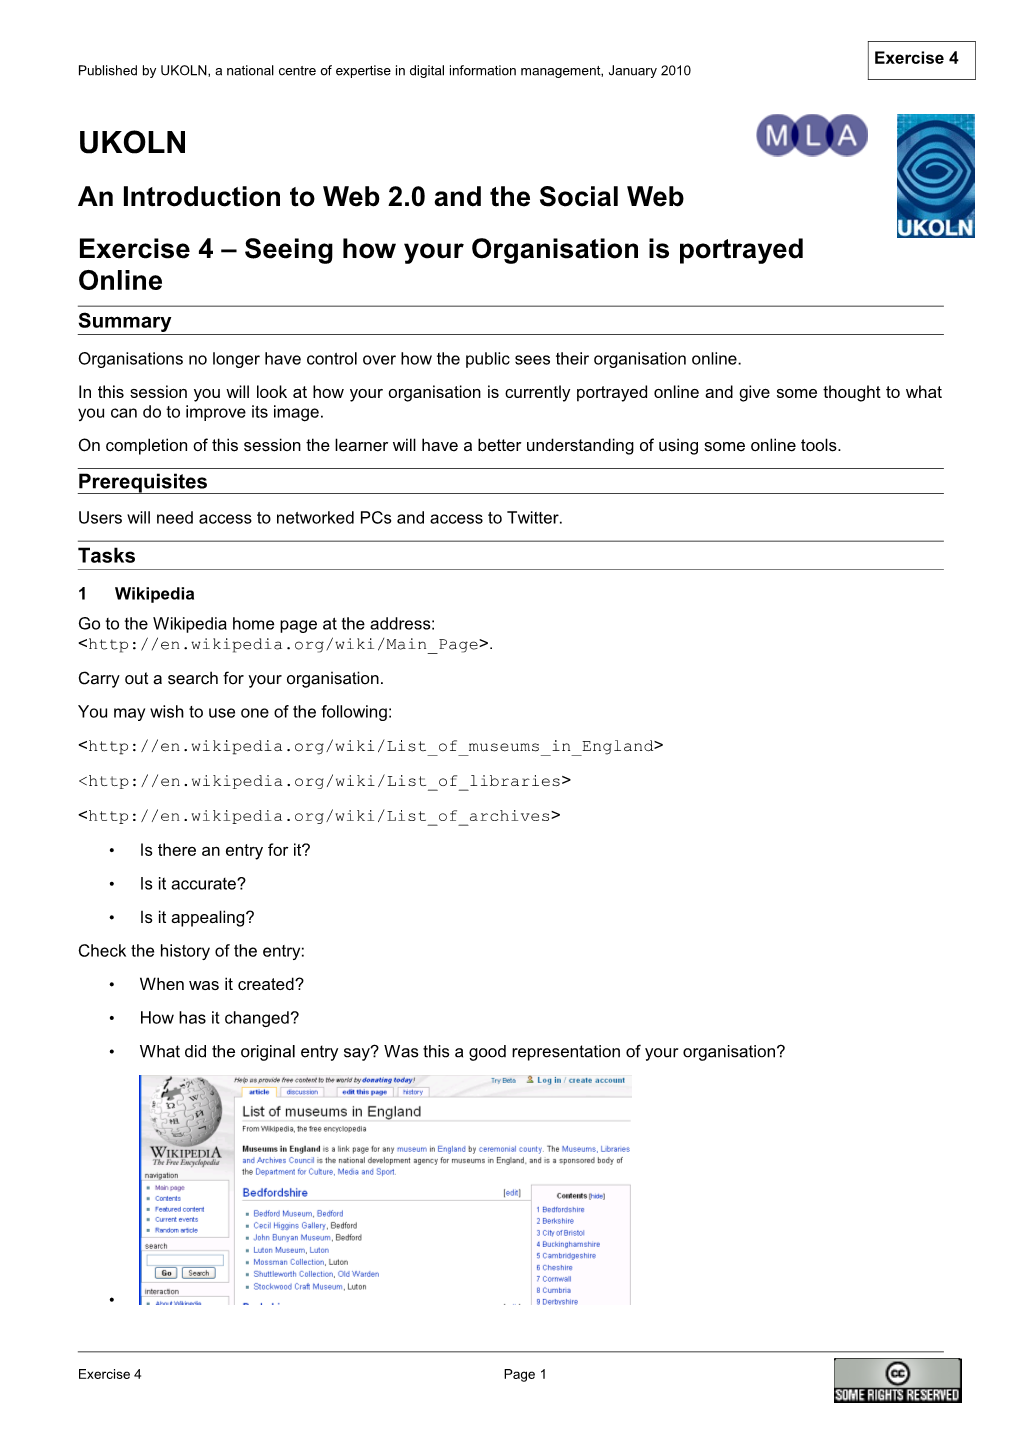 Exercise 4 - Seeing How Your Organisation Looks Online